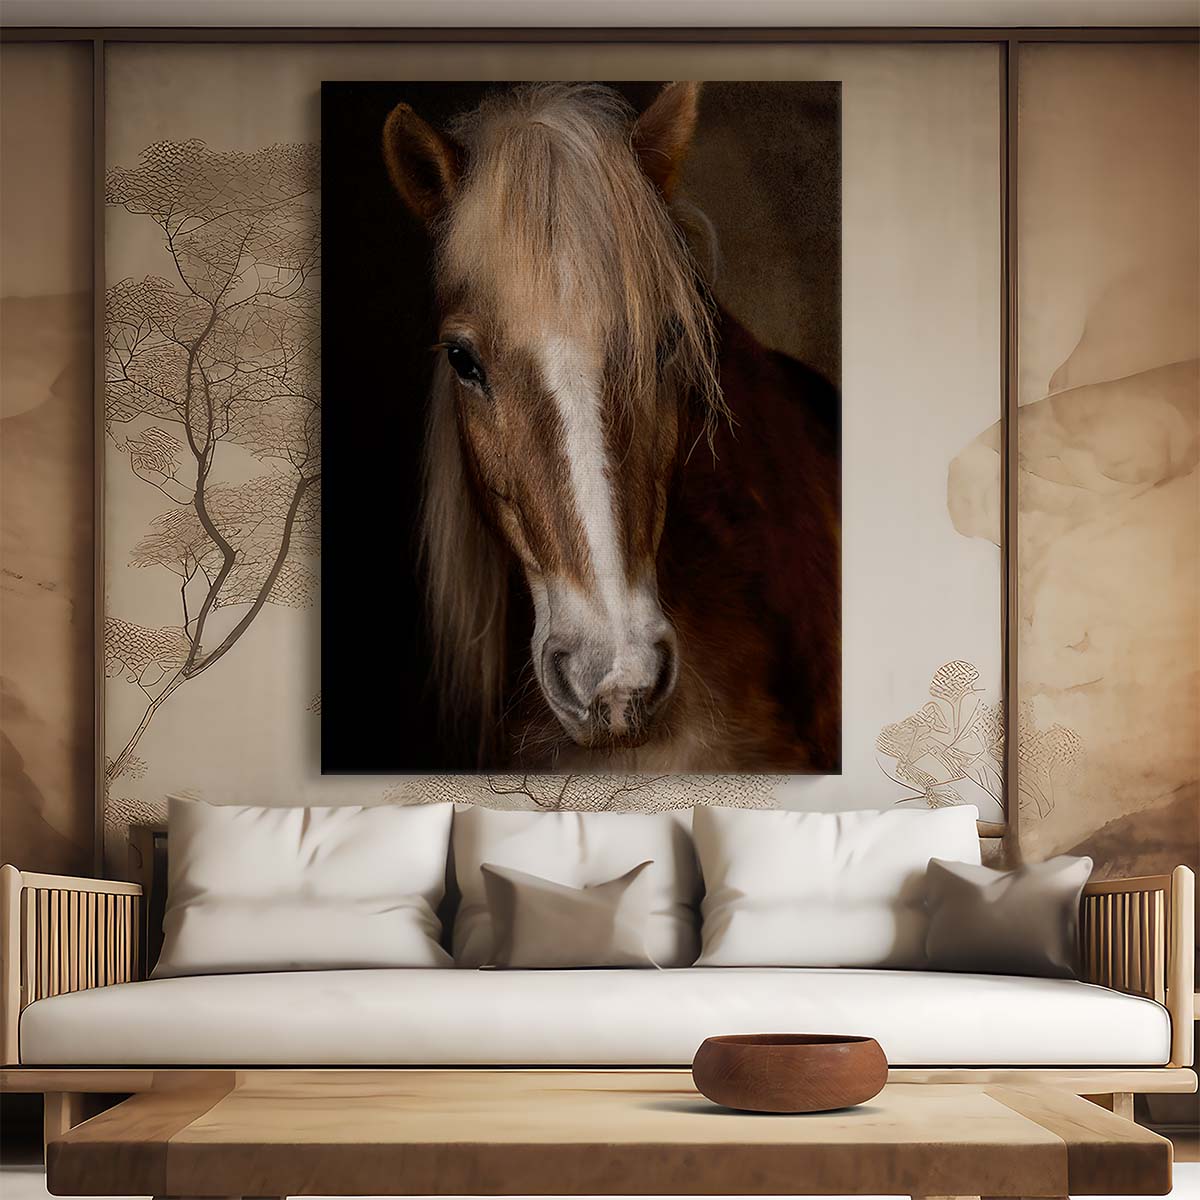 Haflinger Horse Farm Photography, Cute Equestrian Art by Martine Benezech by Luxuriance Designs, made in USA